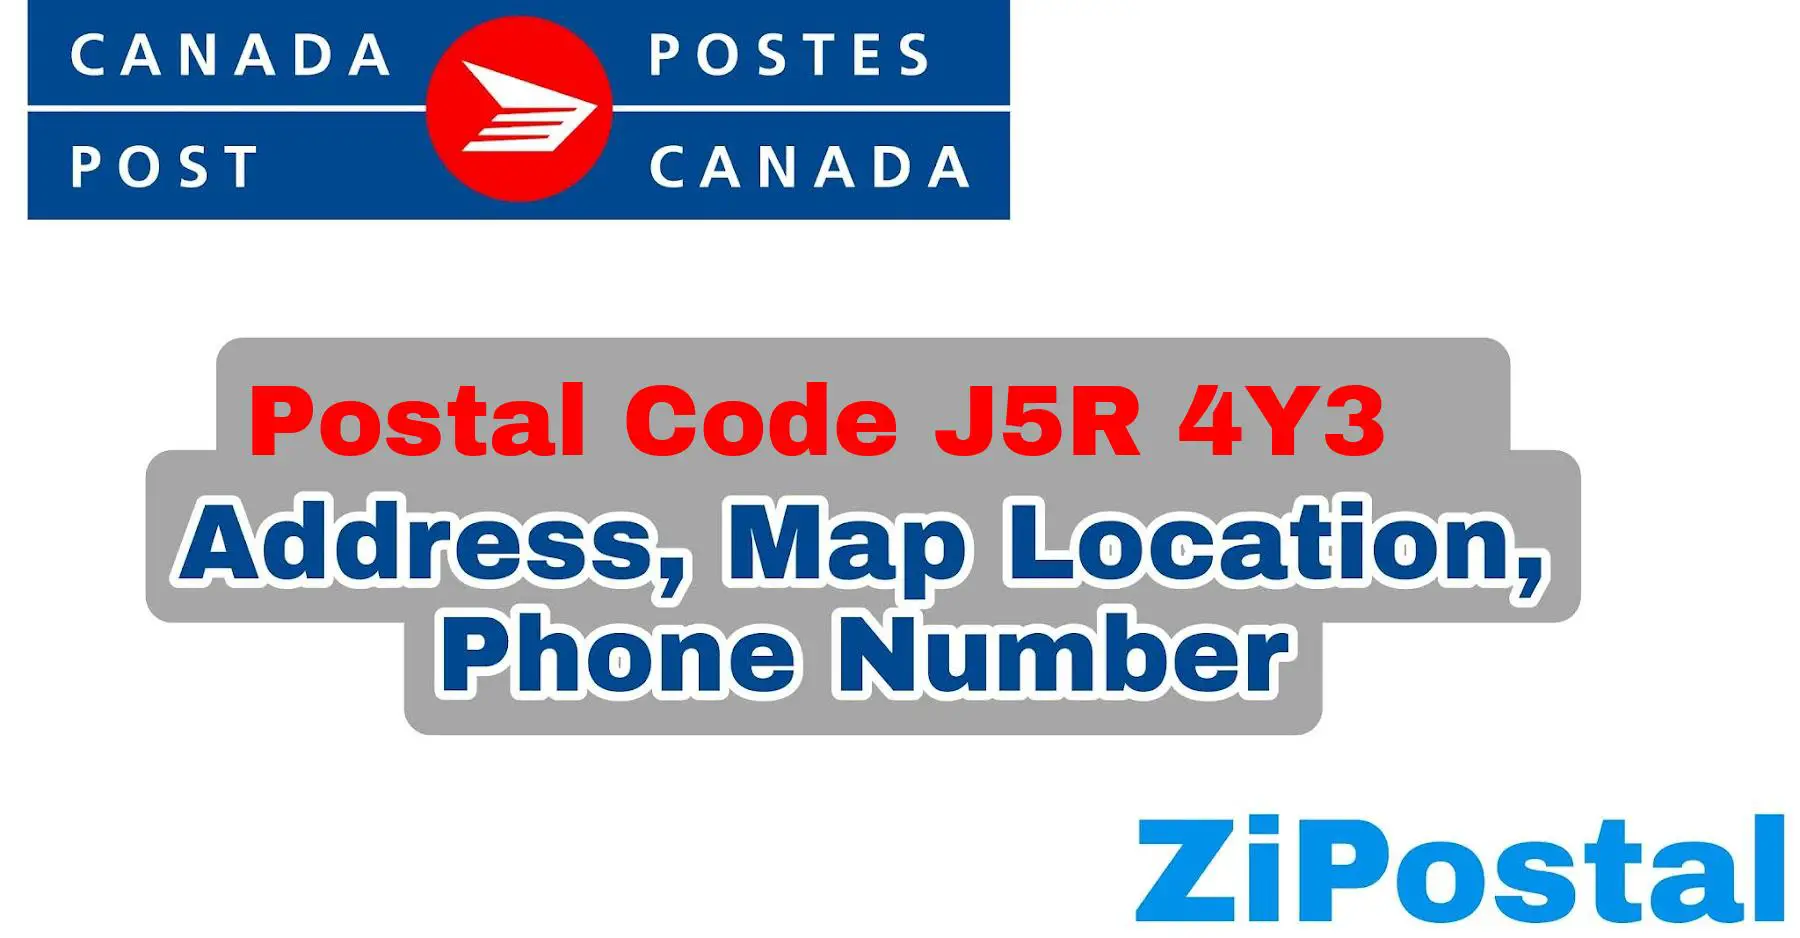 Postal Code J5R 4Y3 Address Map Location and Phone Number